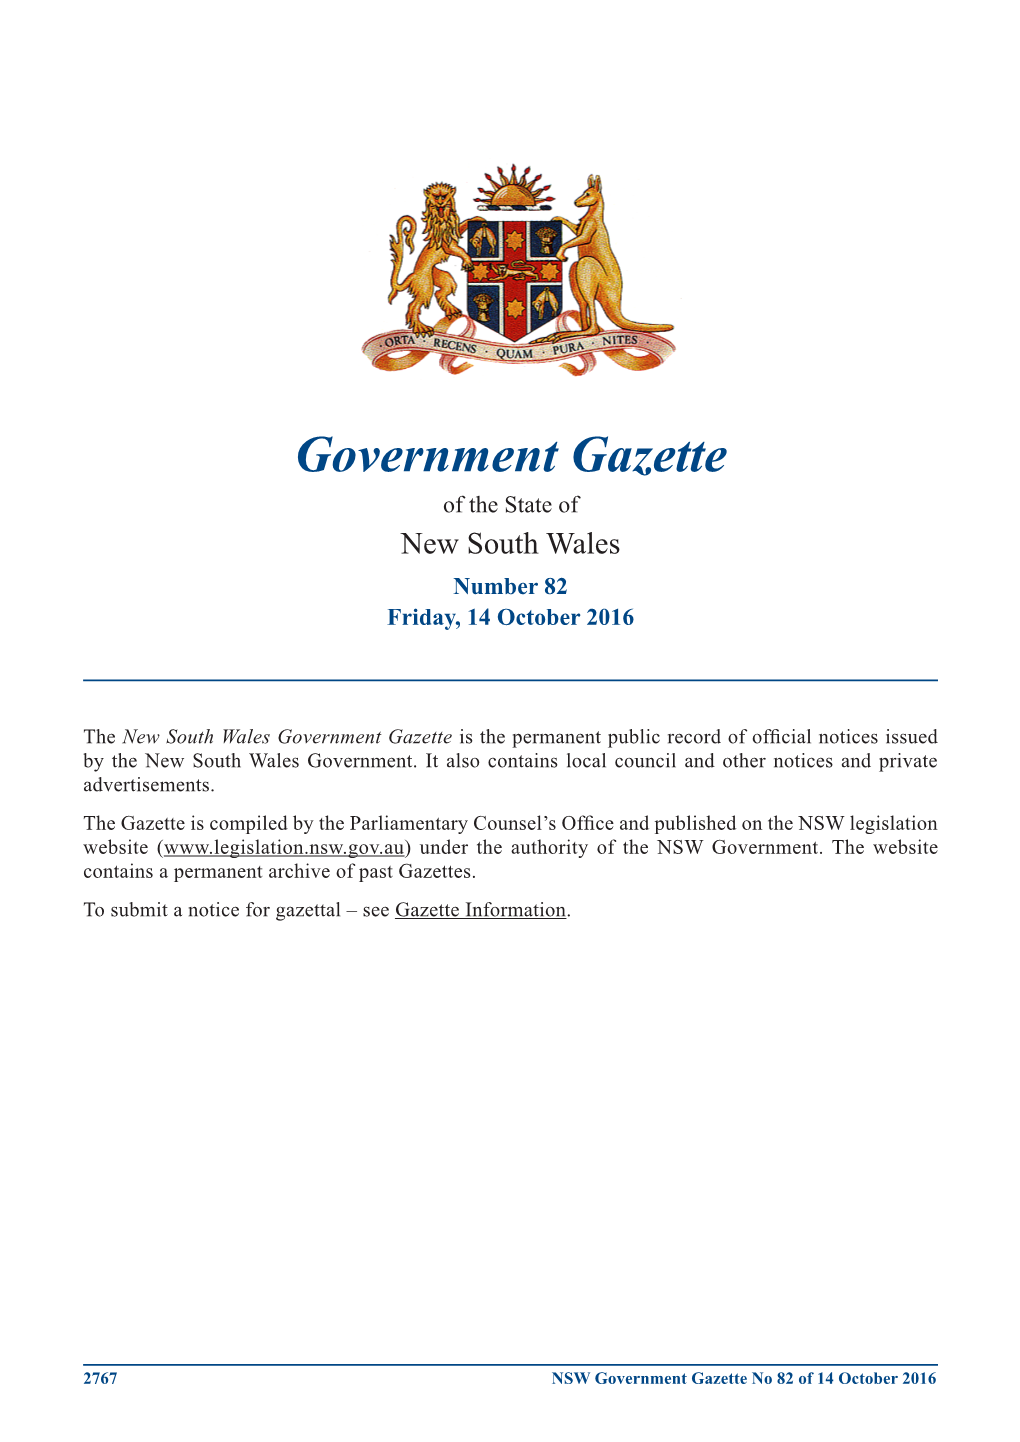 Government Gazette No 82 of 14 October 2016 Government Notices GOVERNMENT NOTICES Planning and Environment Notices